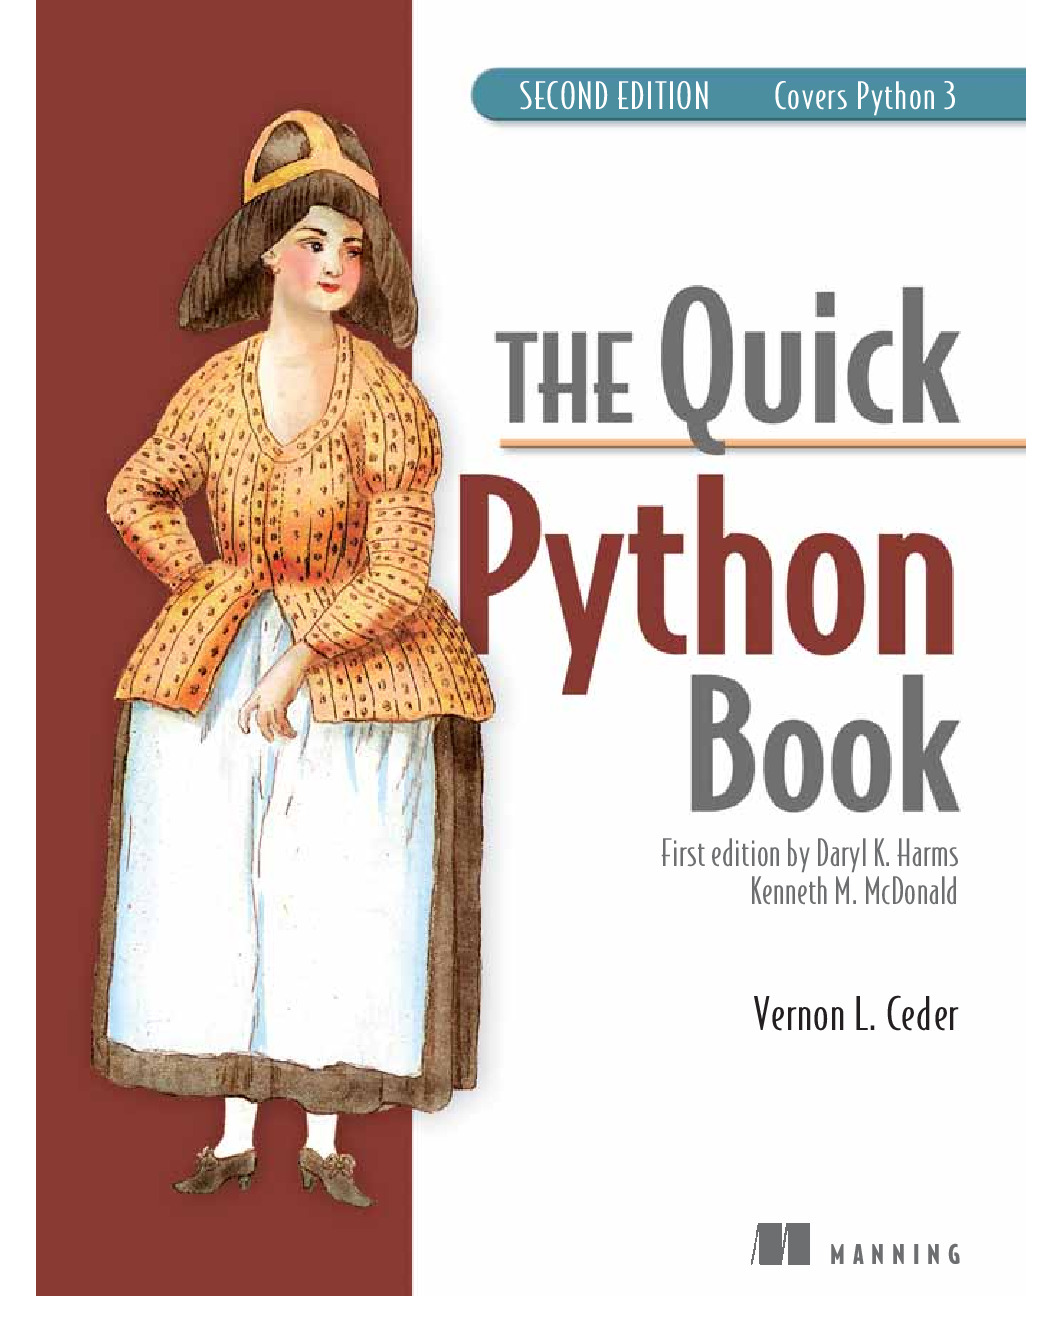 The Quick Python Book – Second Edition